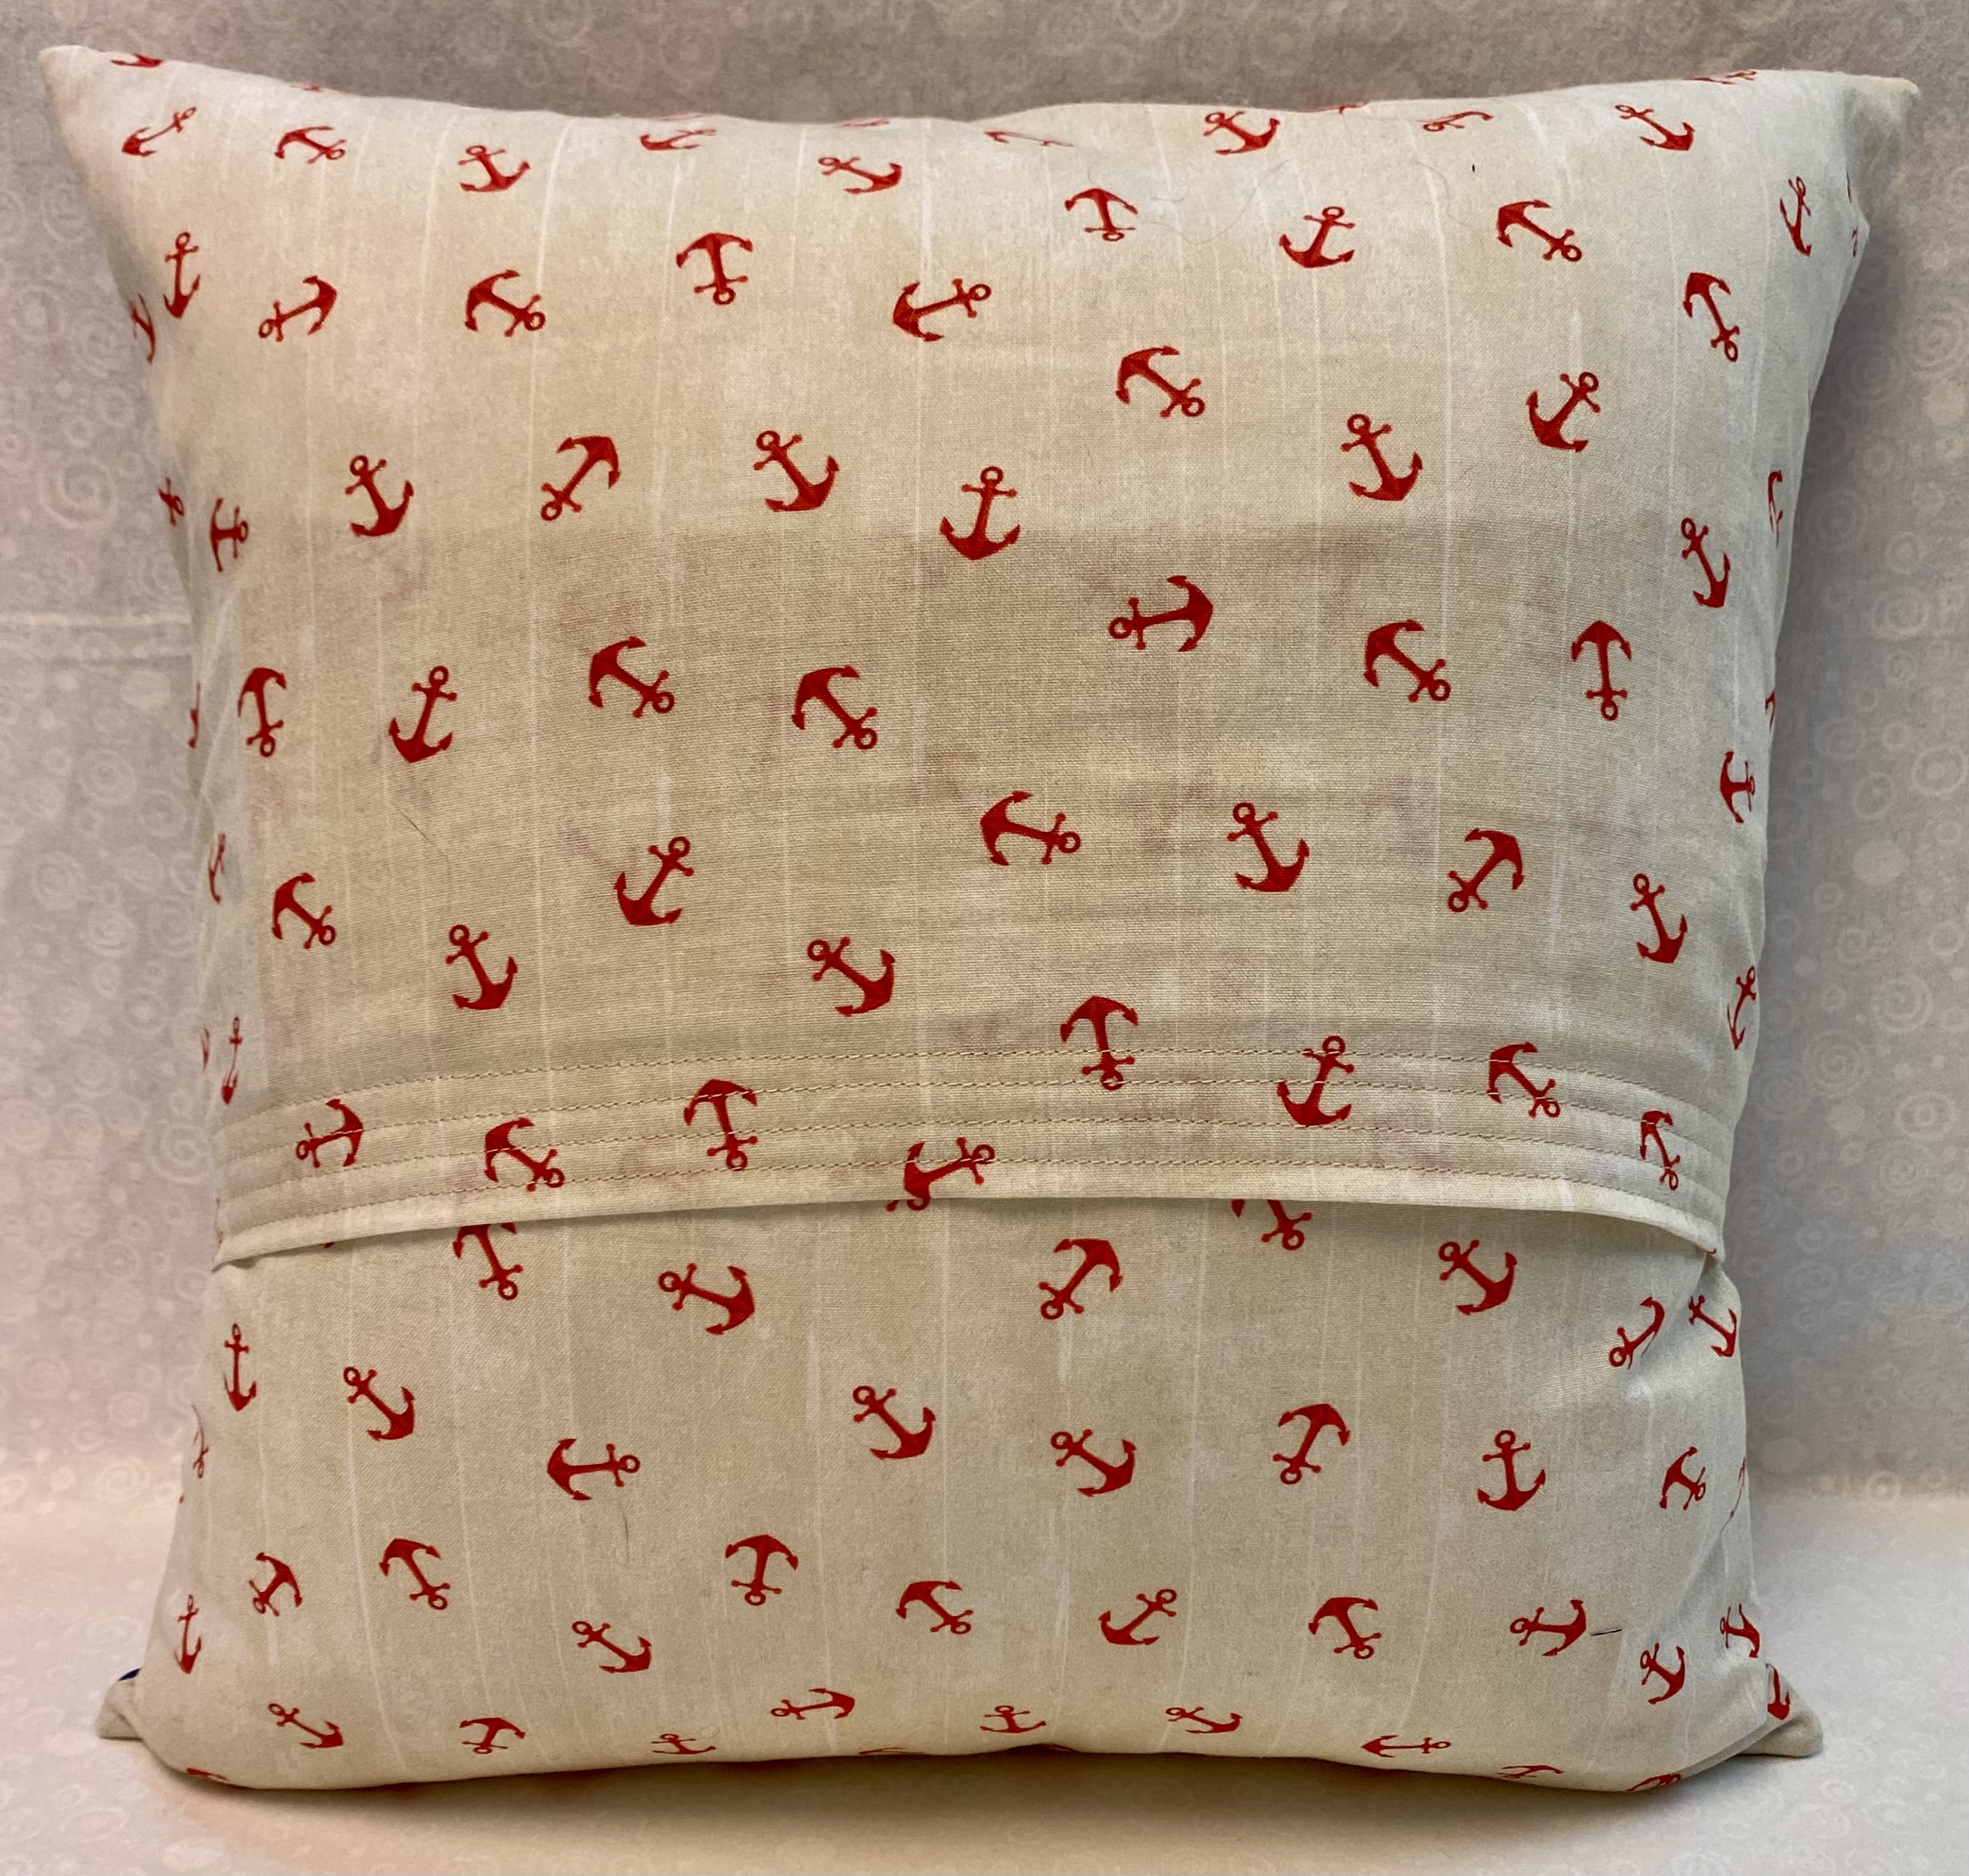 Mariner’s Compass Pillow Cover - 16”